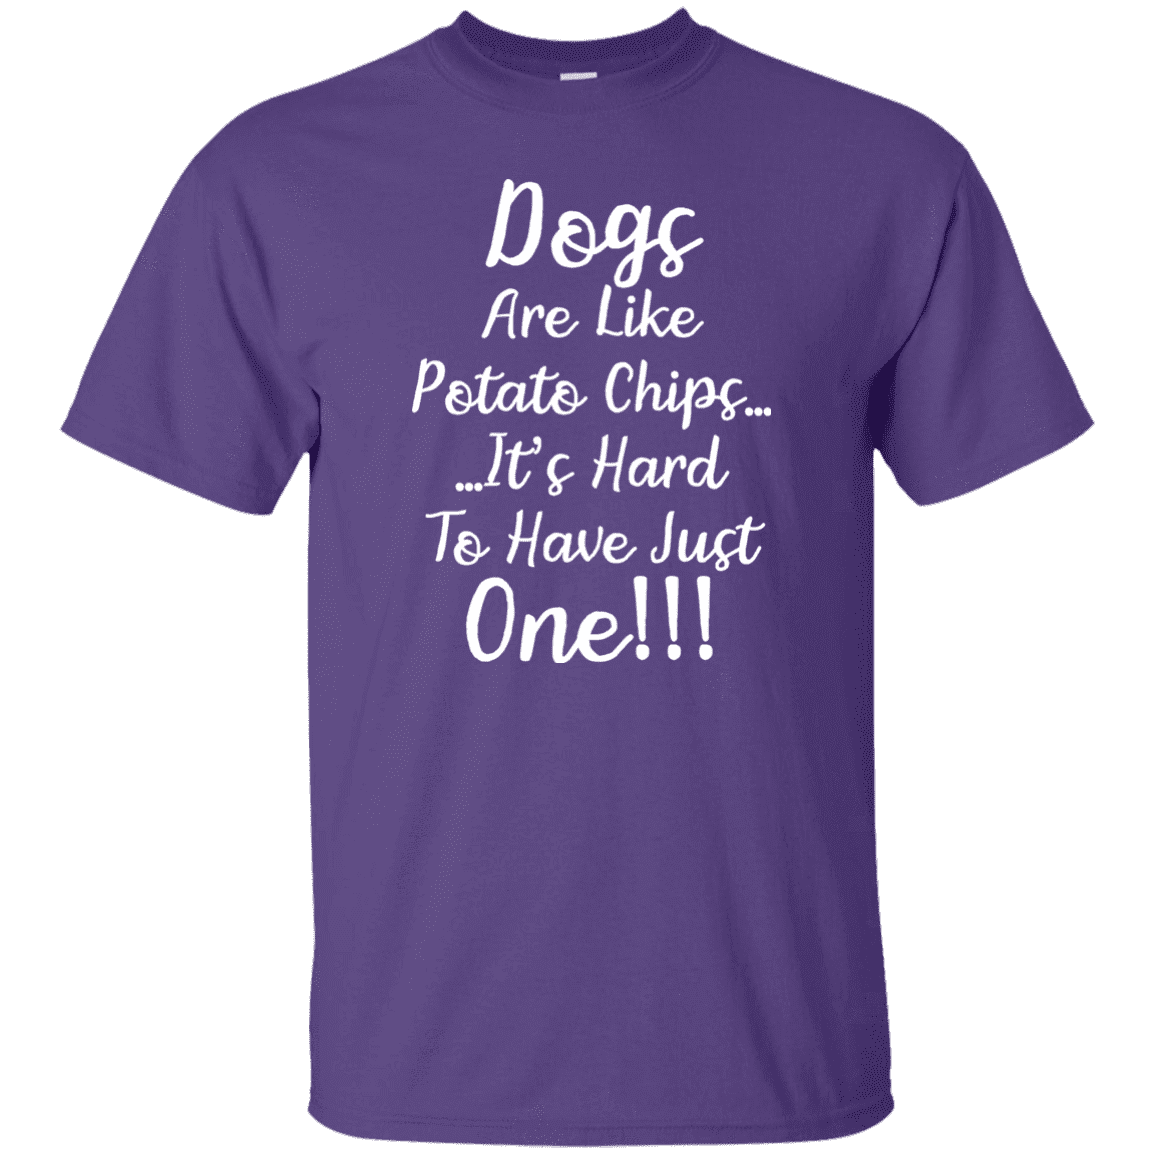 Dogs Are Like Potato Chips - T Shirt.